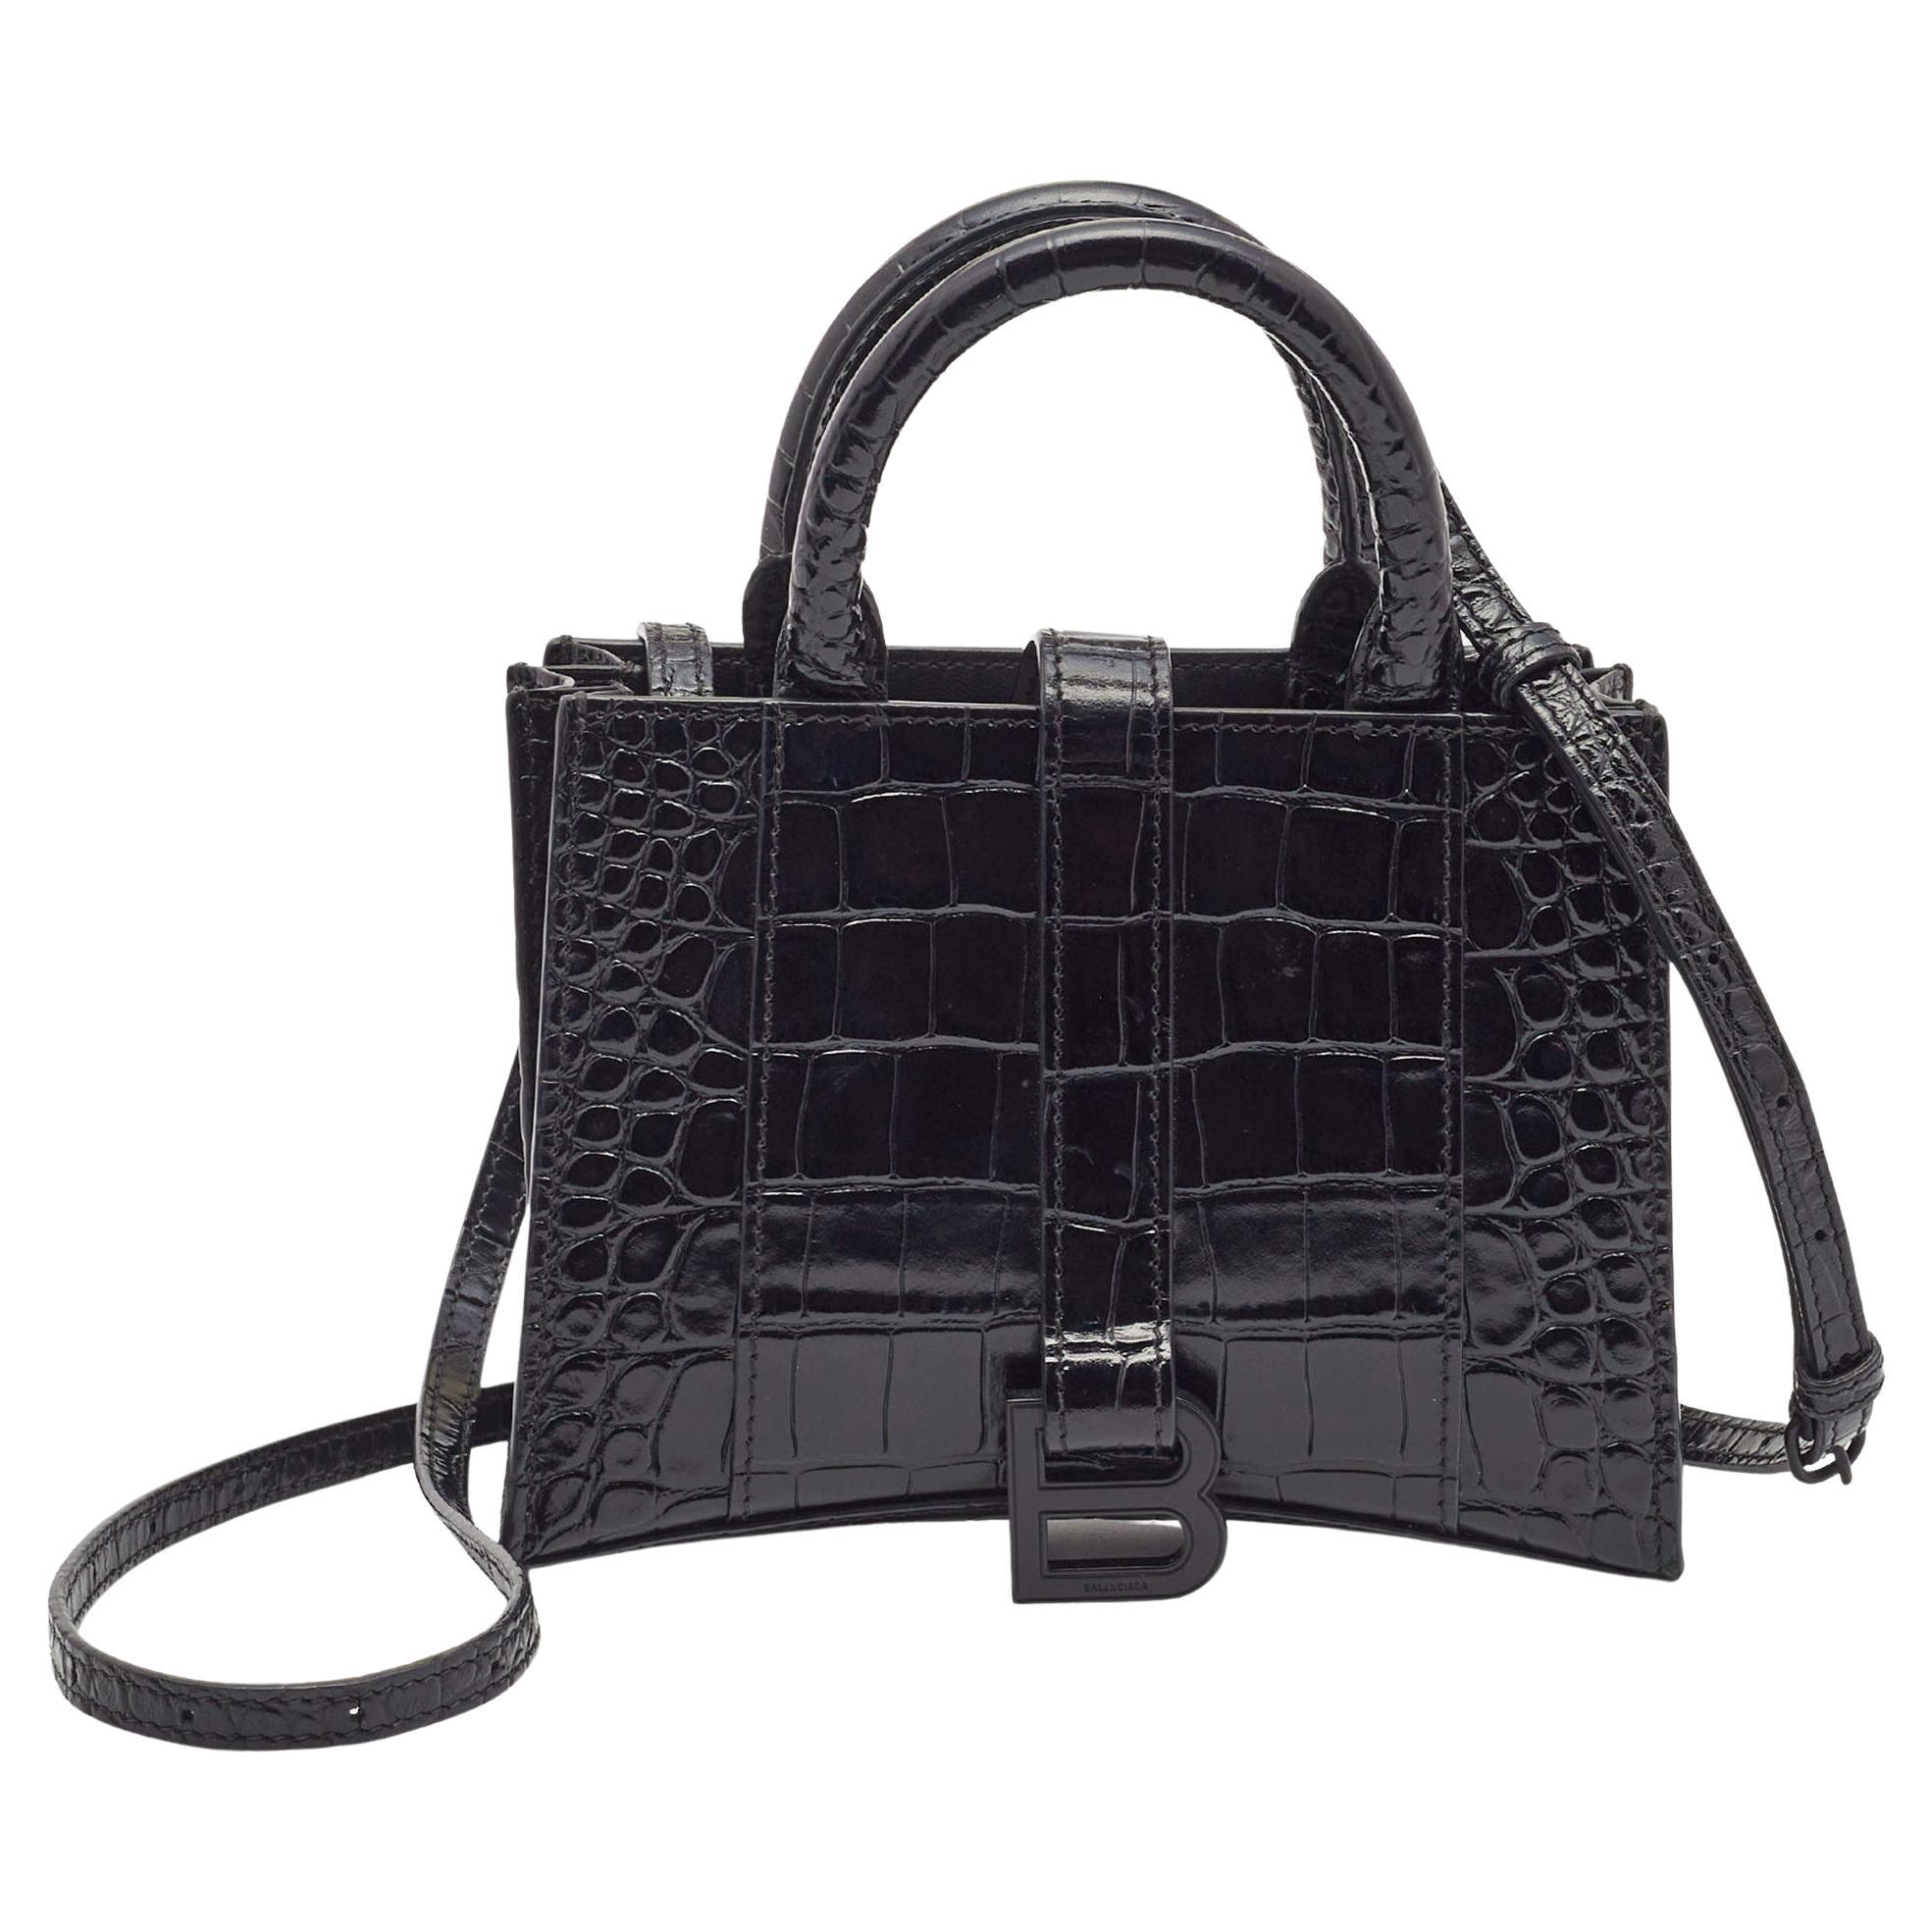 Balenciaga Black Croc Embossed Leather Hourglass XXS East West Tote